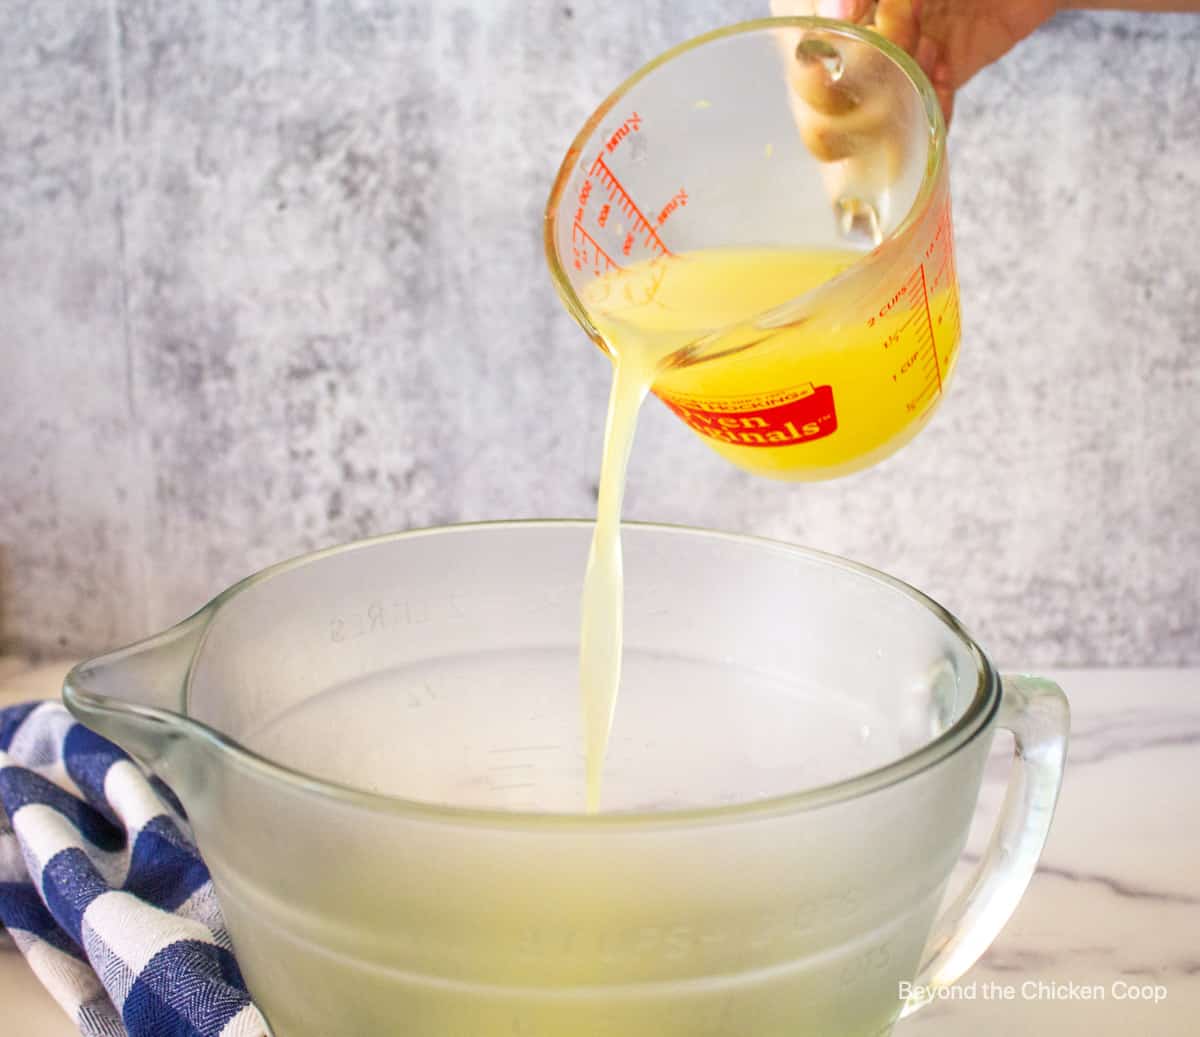 Lemon juice being poured into a bowl.